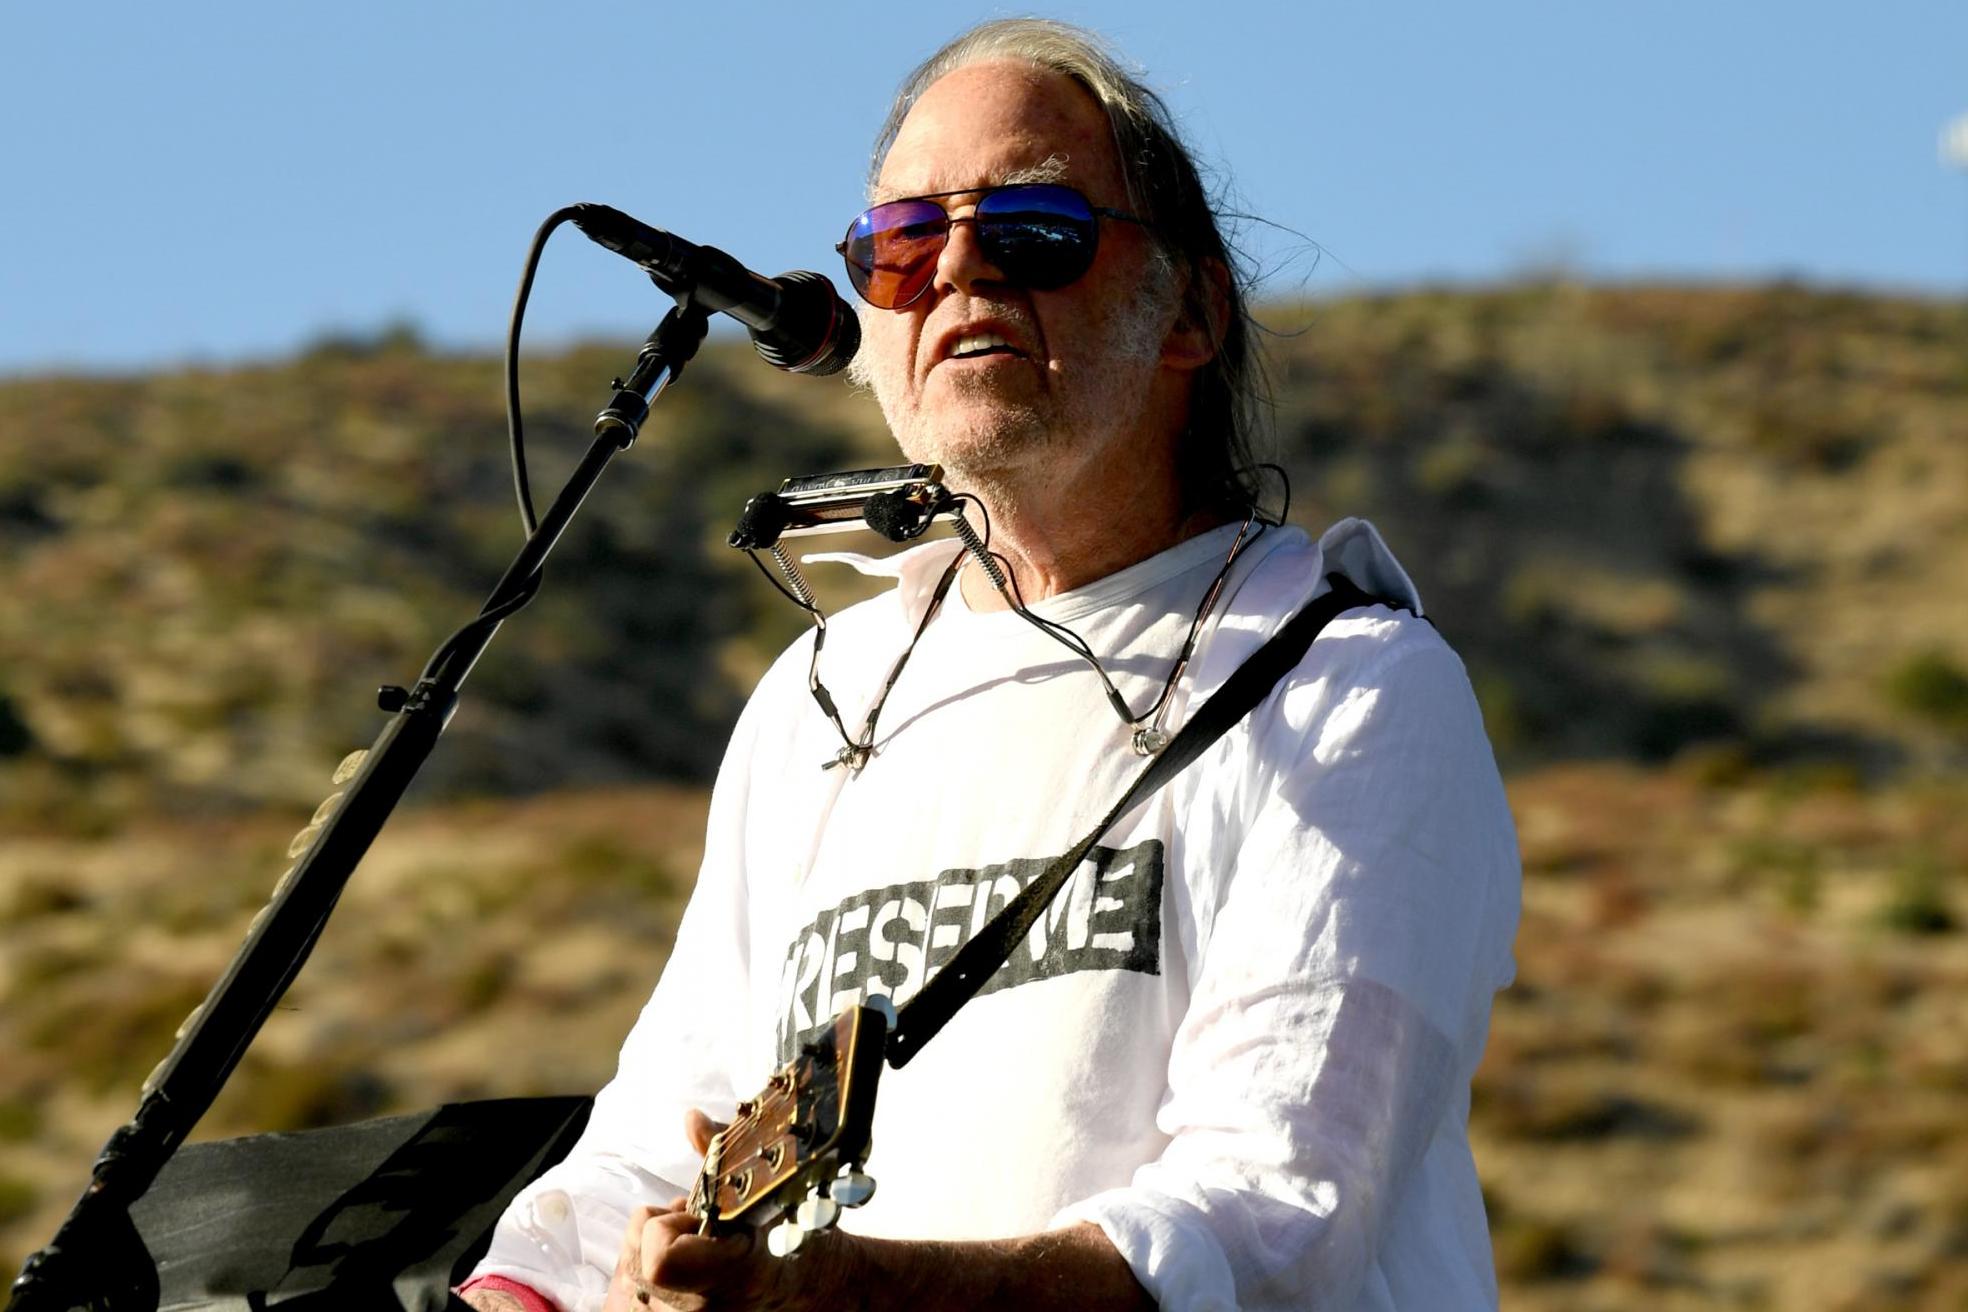 Neil Young performs on 14 September 2019 in Lake Hughes, California.